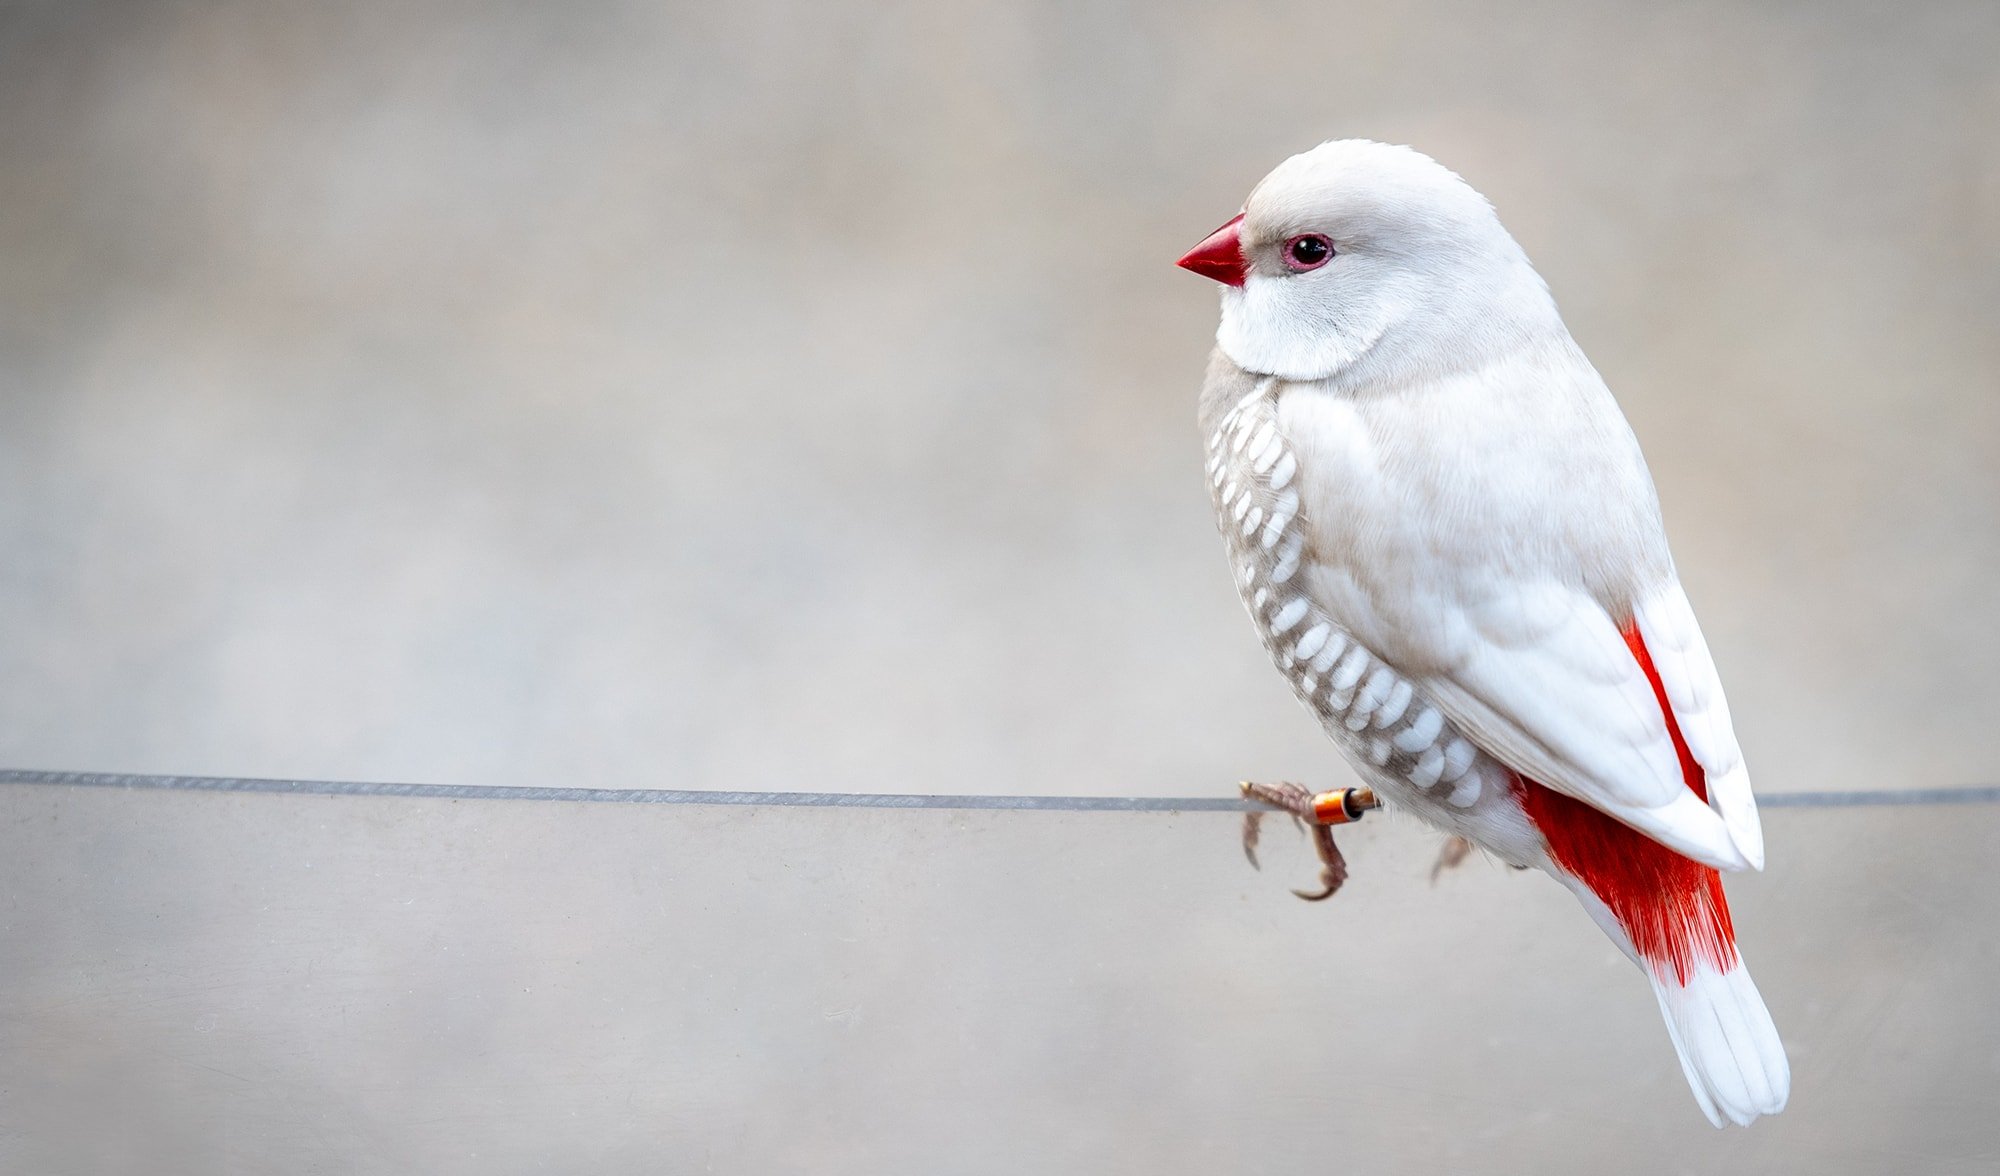 The silver diamond firetail barely even looks real